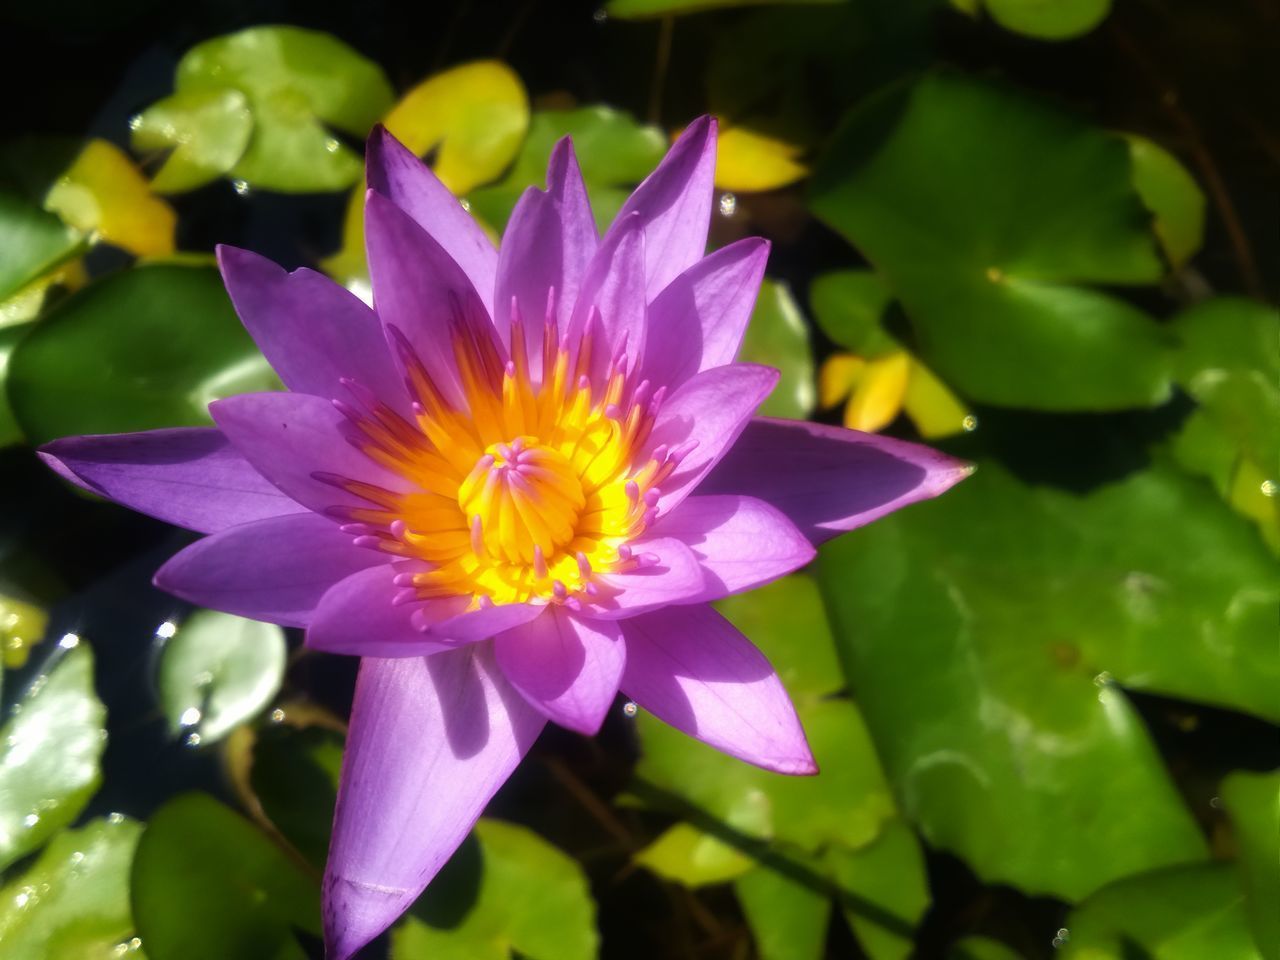 CLOSE-UP OF PURPLE WATER LILY IN LOTUS